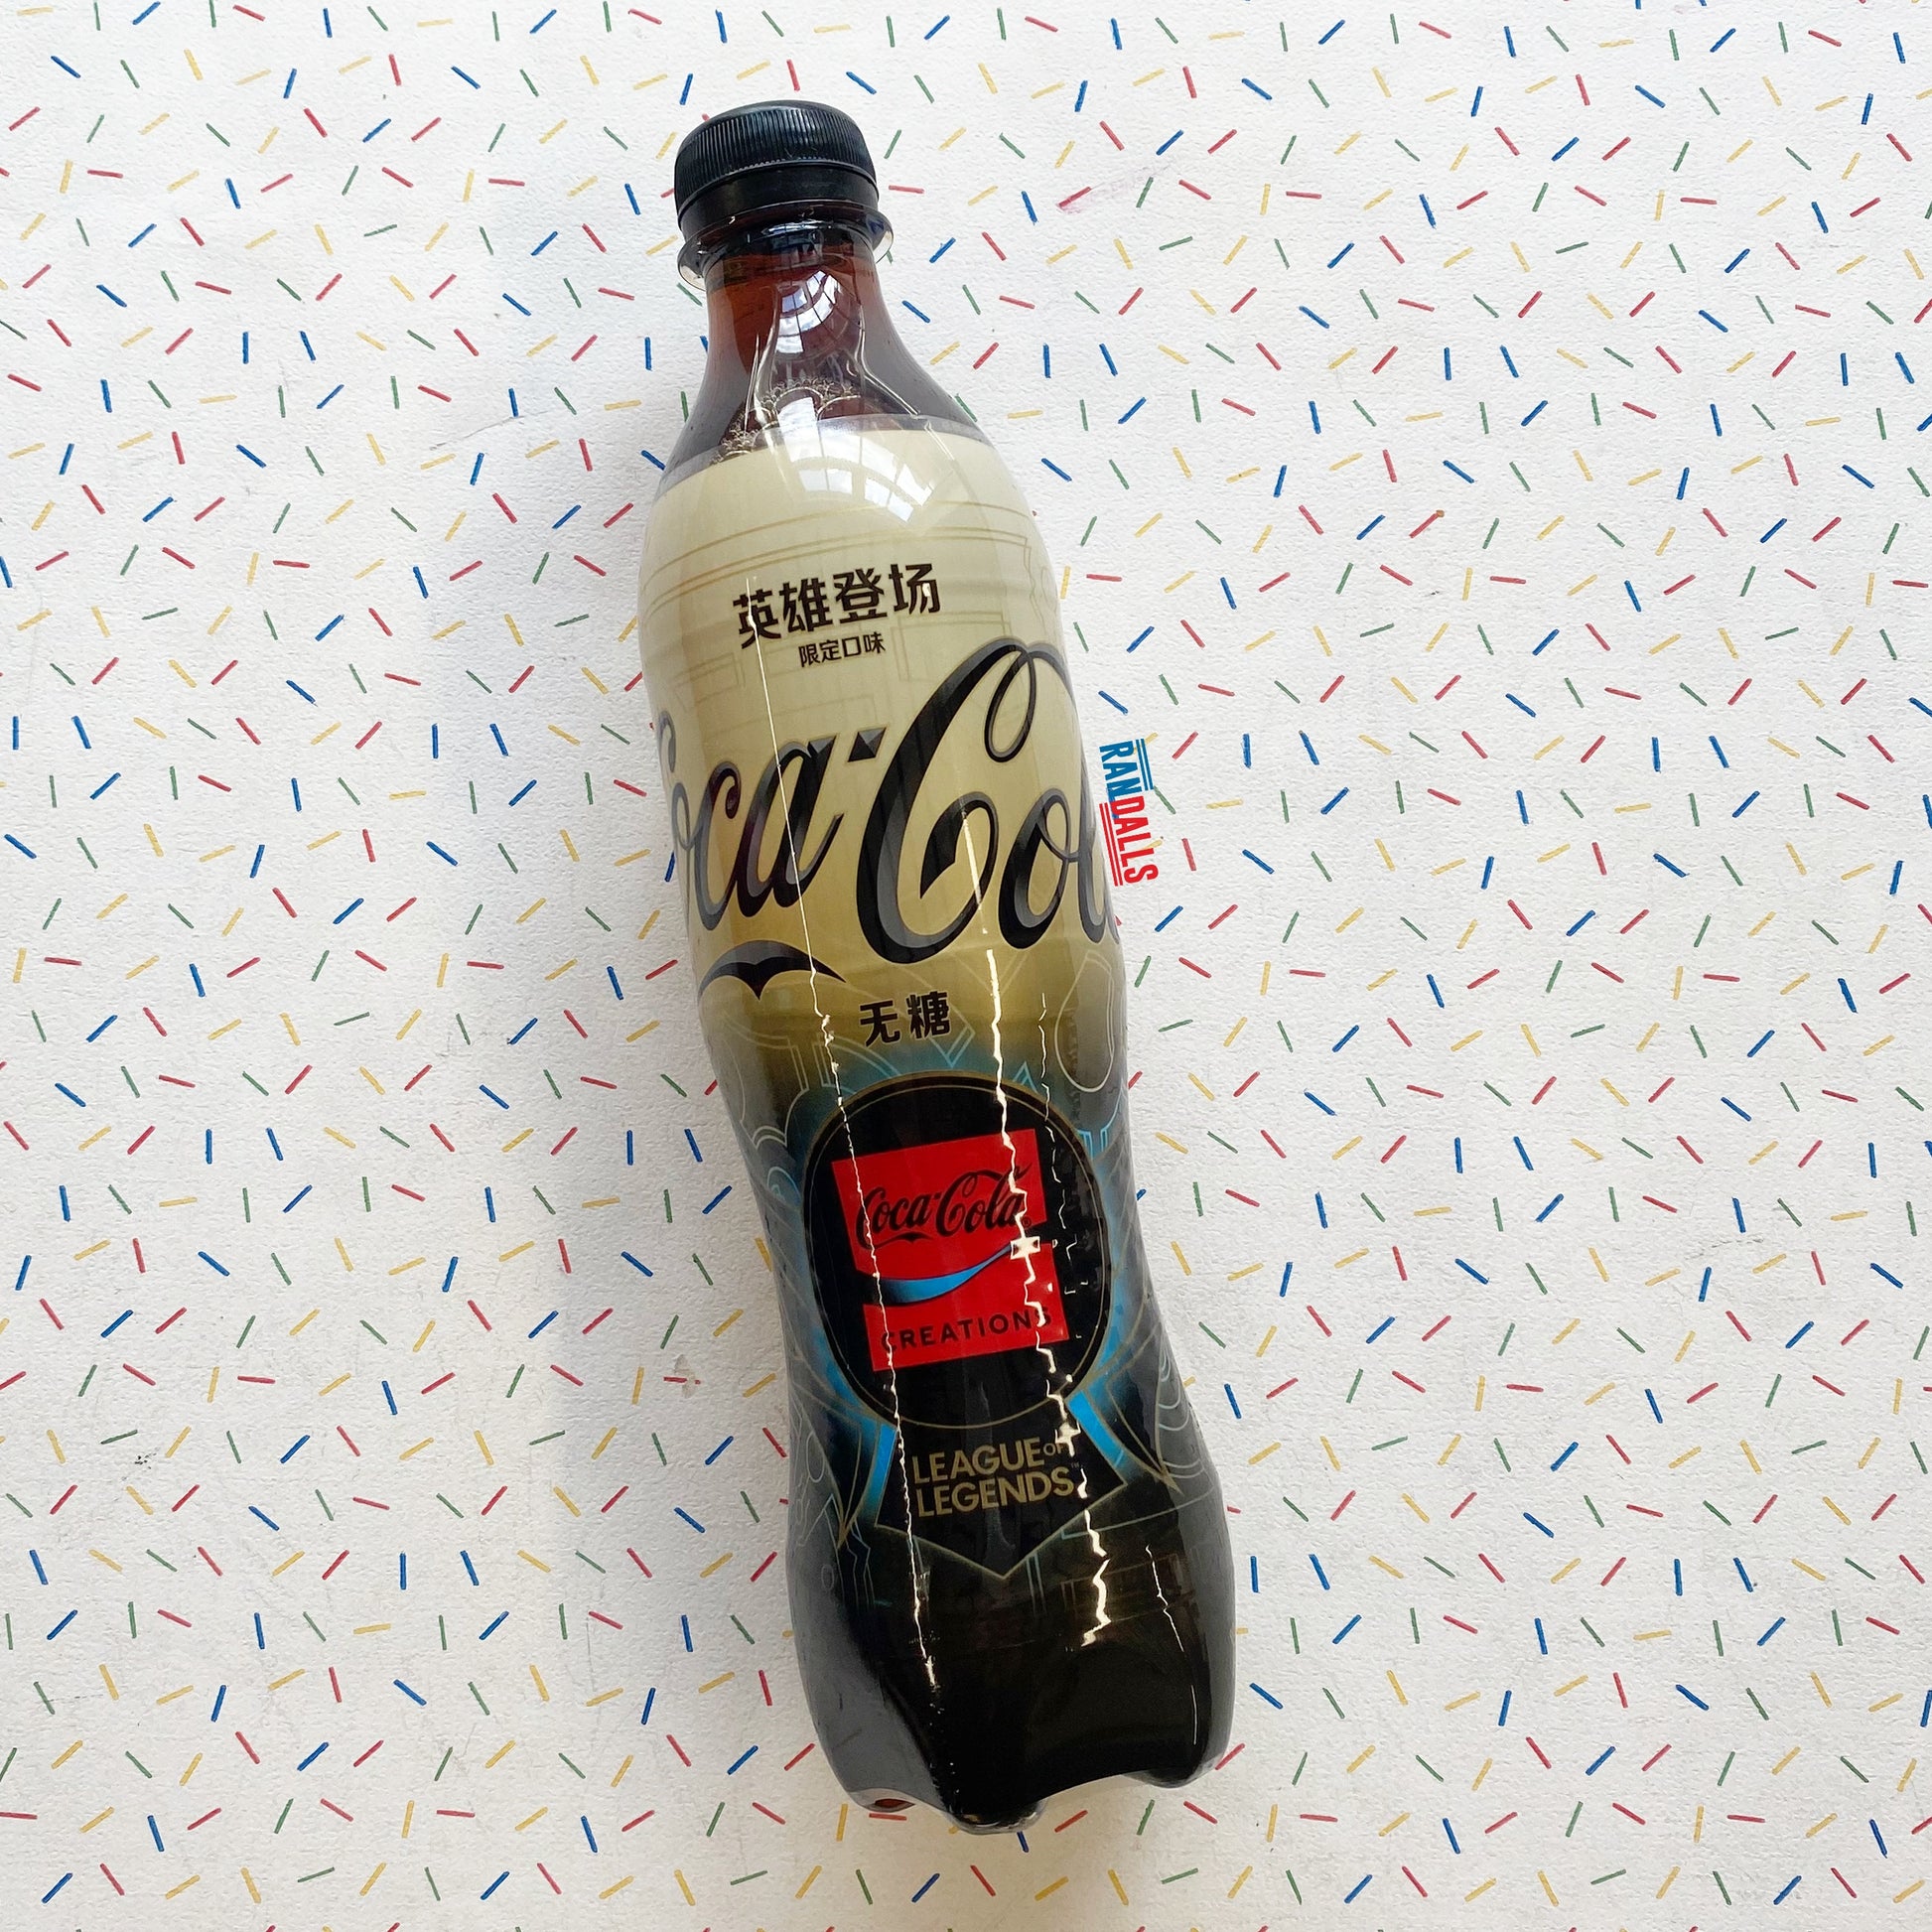 coca cola league of legends, creations, fizzy drink, pop, soda, bottle, sugar, coke, china, chinese, randalls